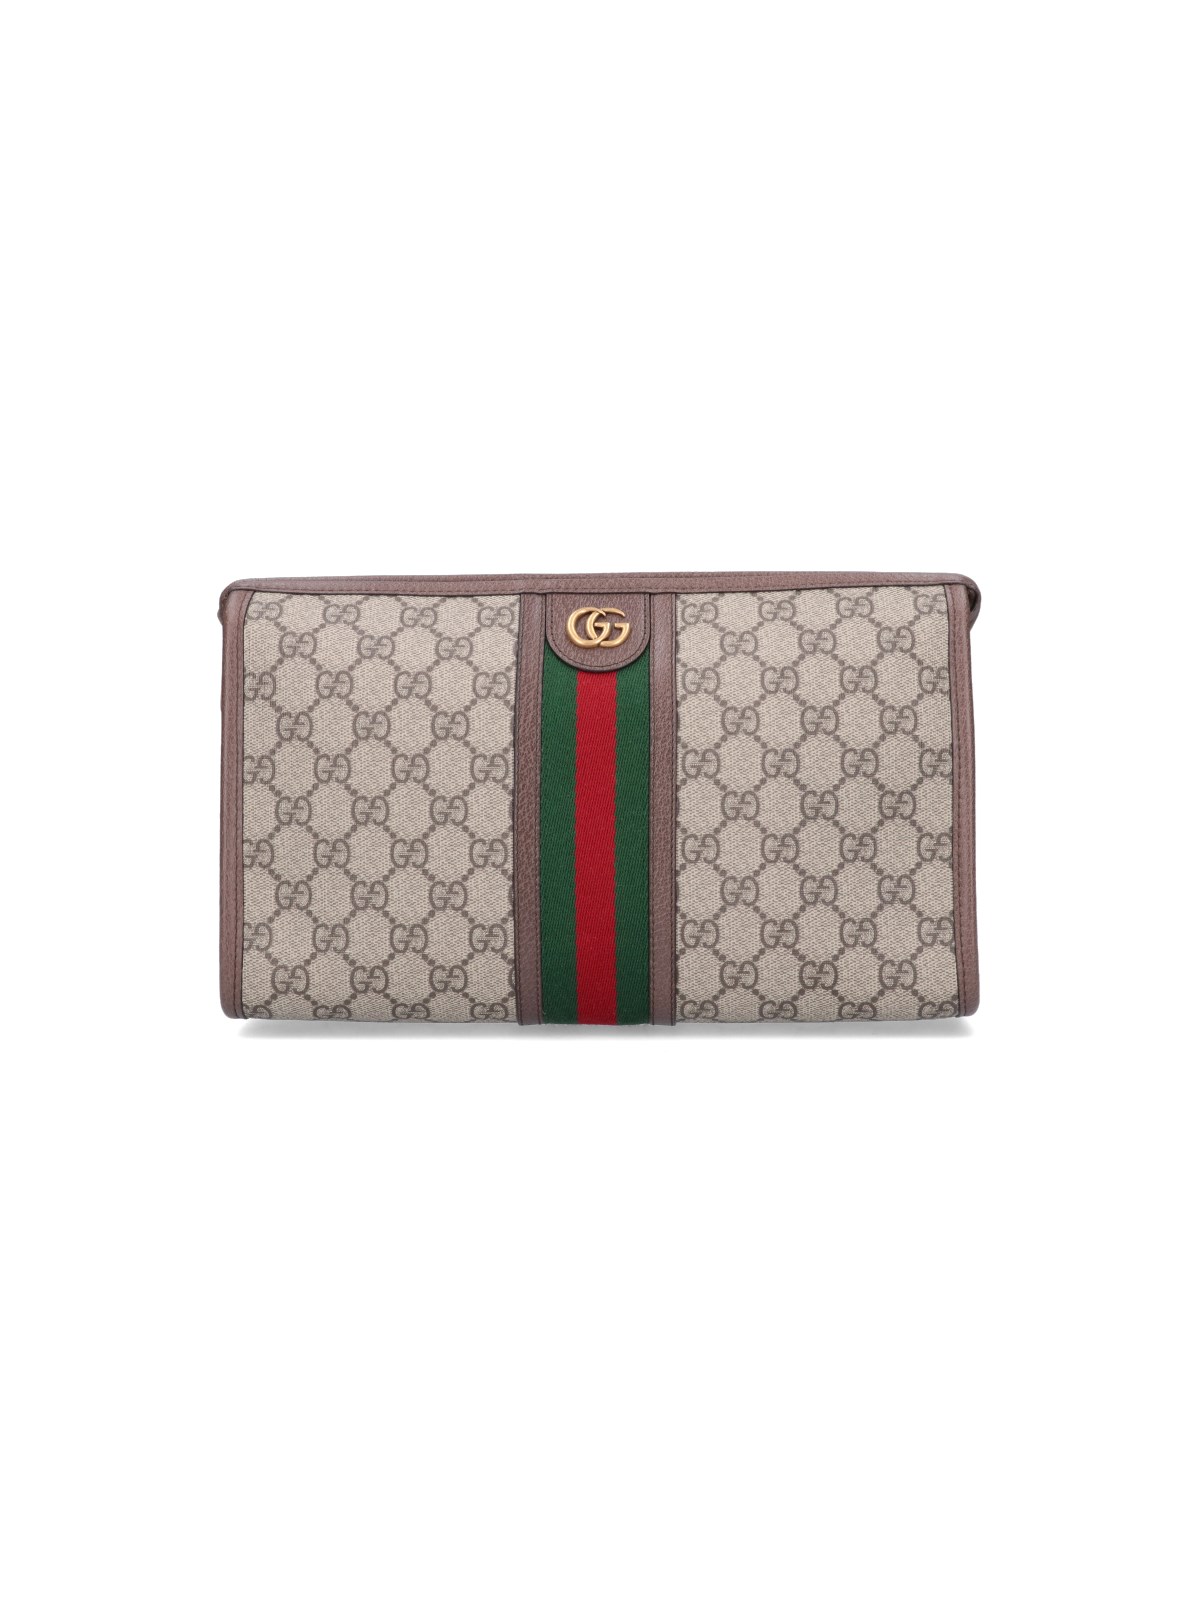 Gucci 'ophidia' Pouch In Brown